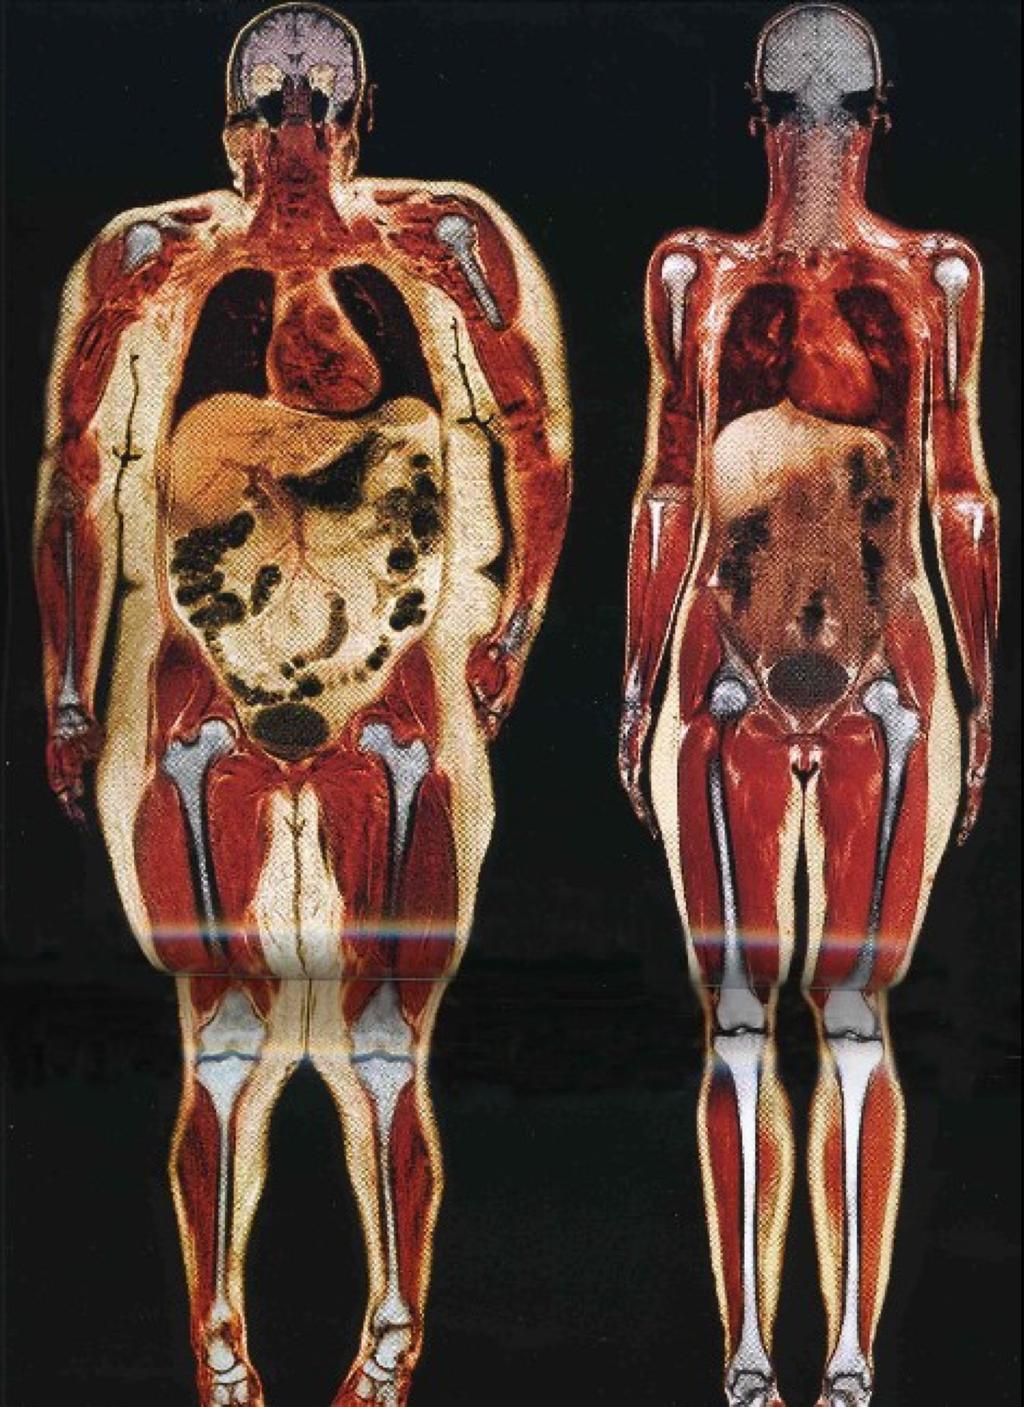 The obese woman on the left has fat around her organs (shown by the yellow areas) and an enlarged heart which can have dire consequences on her health Notice anything?